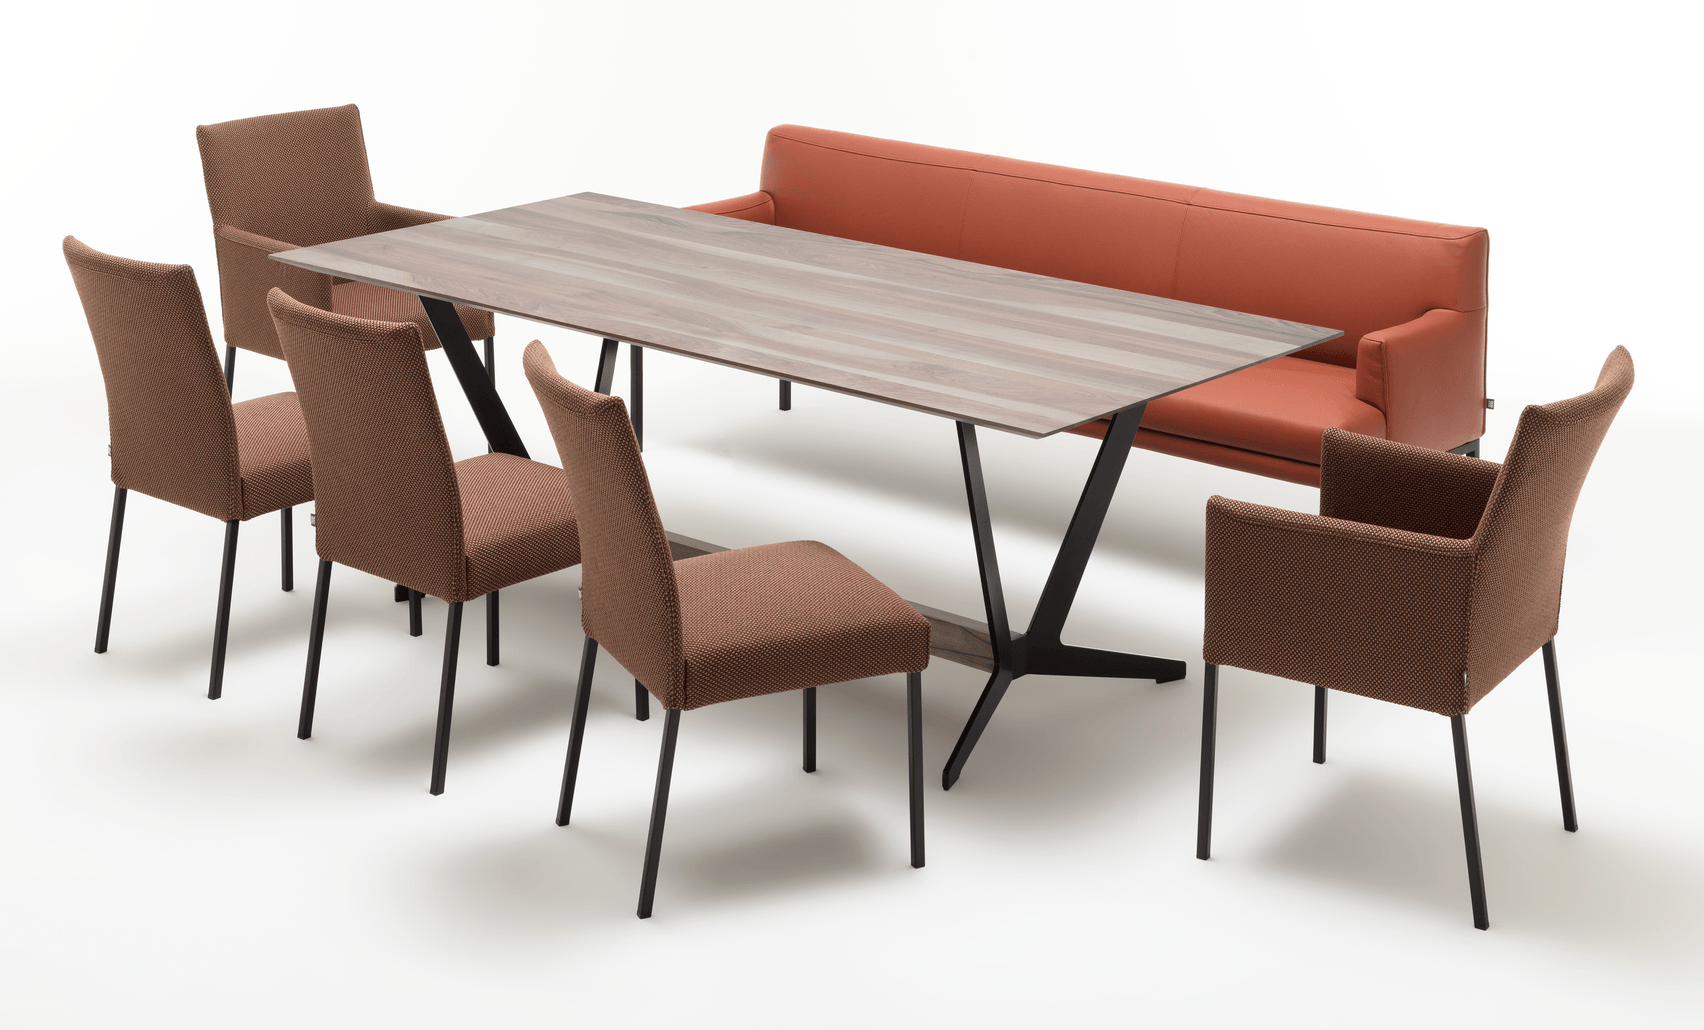 Rolf Benz Nuvola and dining room furniture